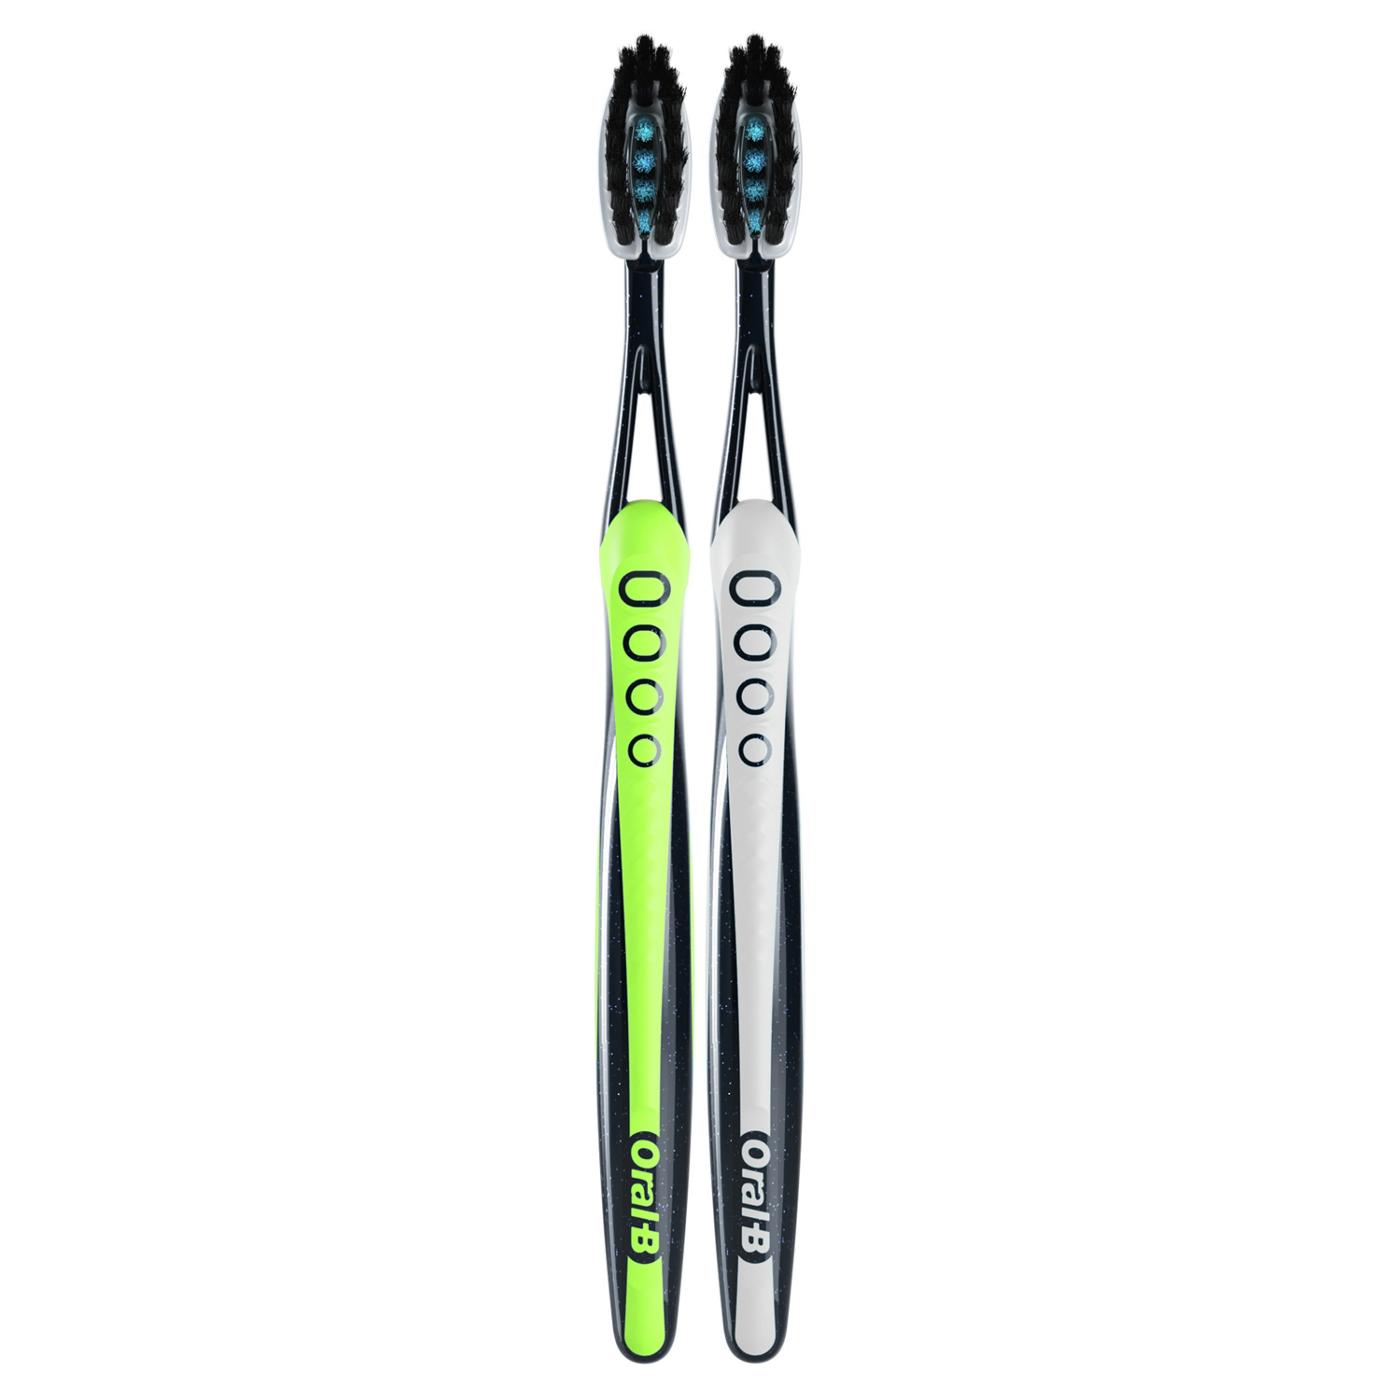 Oral-B Pro-Flex Charcoal Infused Soft Toothbrush; image 6 of 8